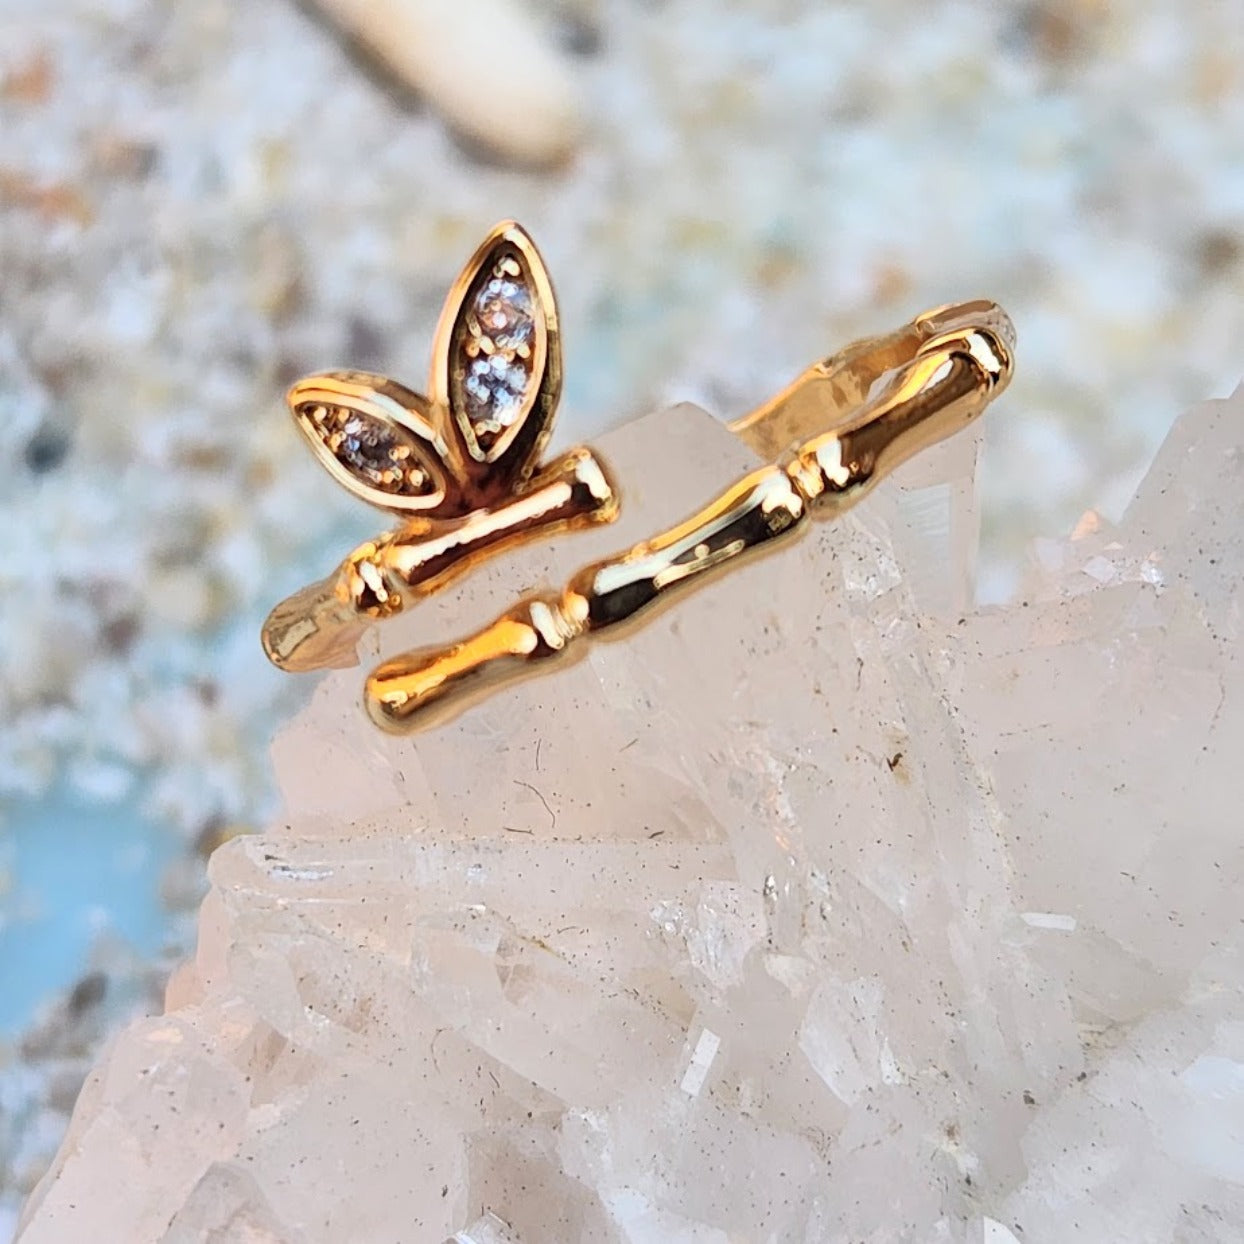 BAMBOO BUTTERFLY - WATERPROOF ADJUSTABLE RING - Premium Rings from www.beachboho.com.au - Just $25! Shop now at www.beachboho.com.au